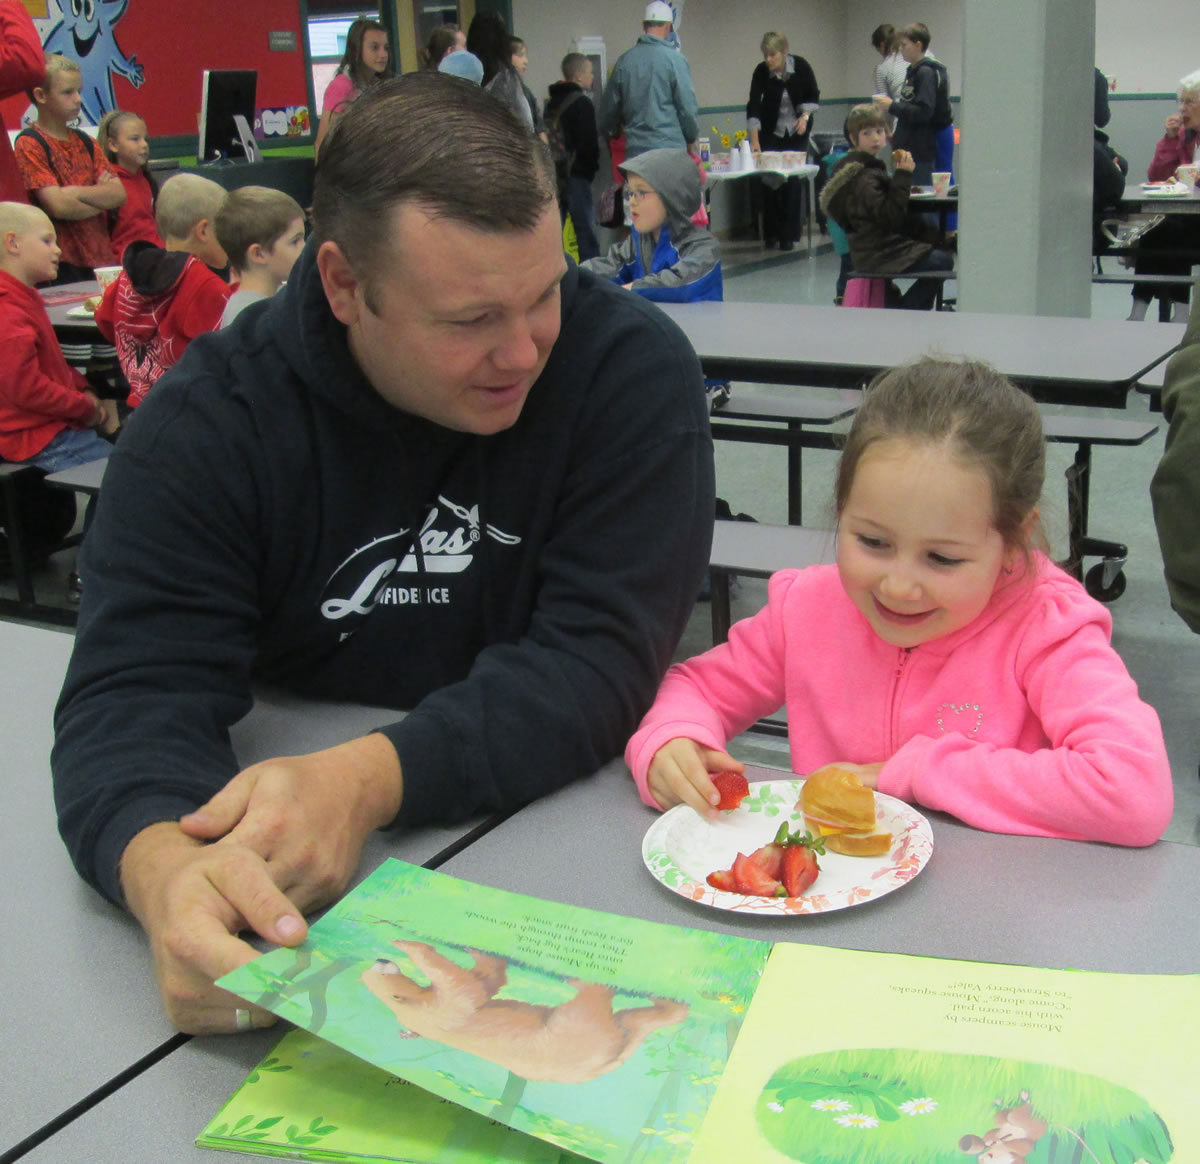 Seth Teeters and his daughter, Lela, enjoy the Books and Breakfast event at Cape Horn-Skye Elementary.